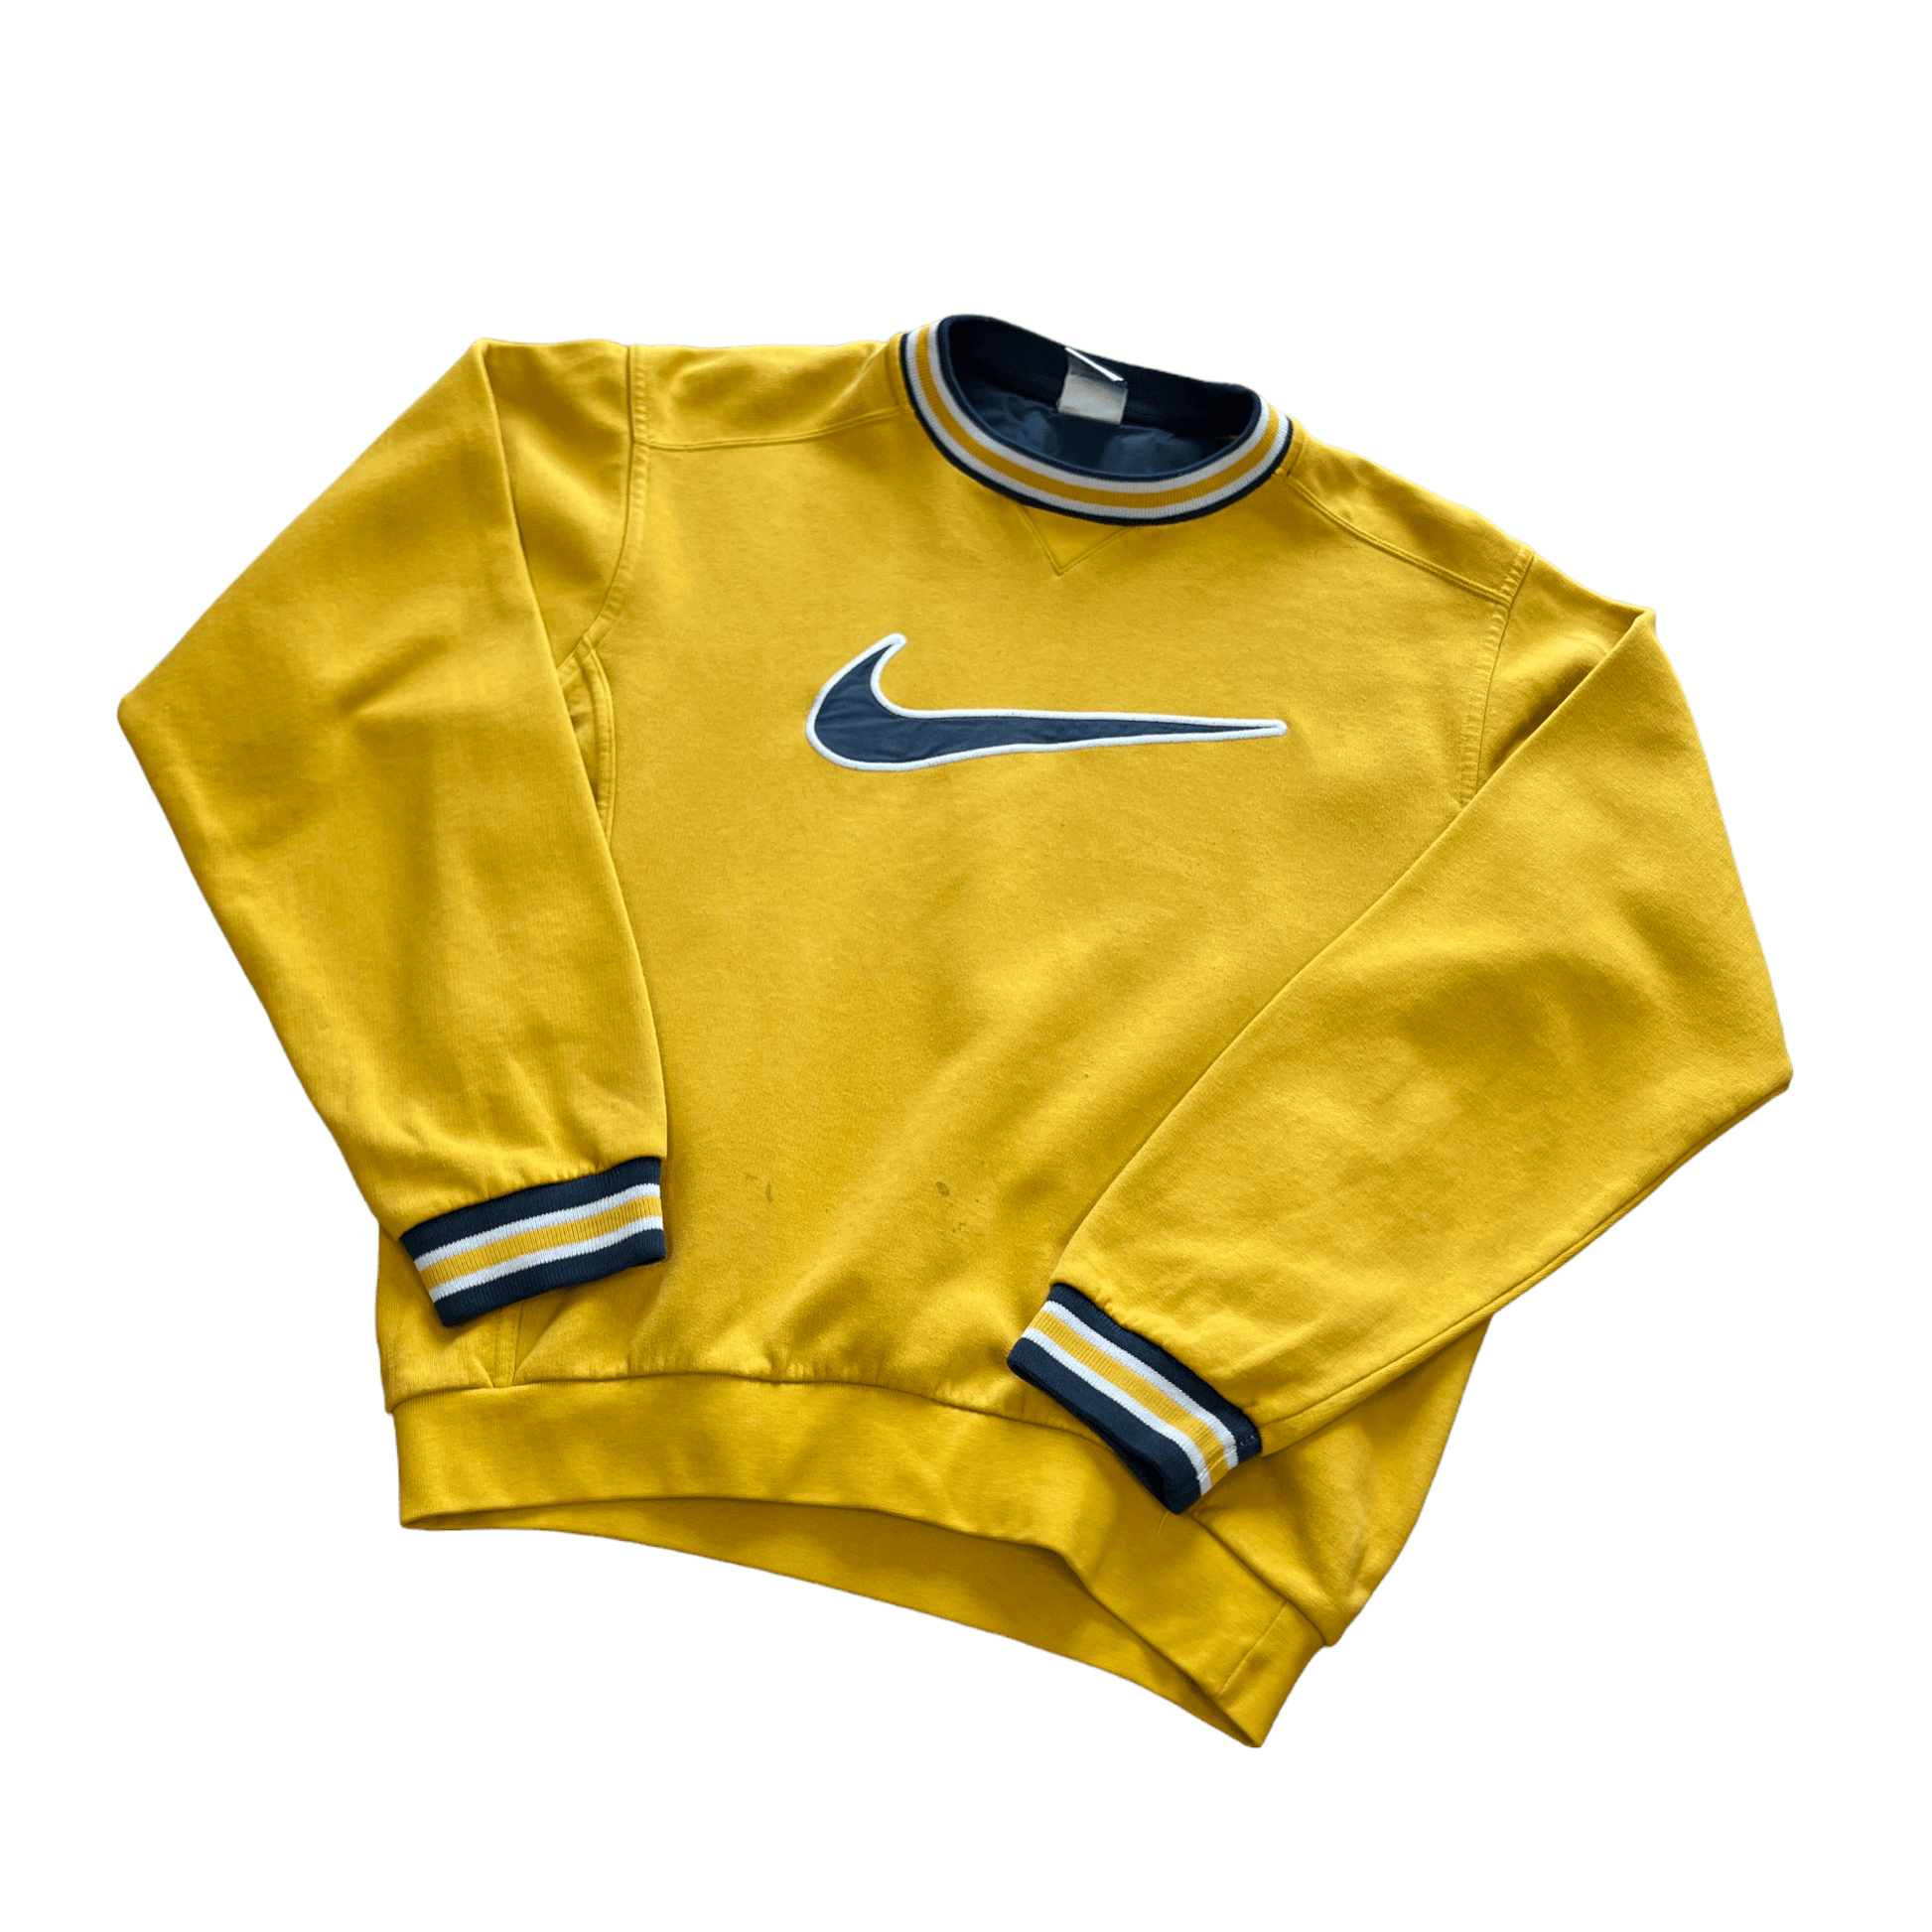 Vintage 90s Yellow Nike Sweatshirt - Recommended Size - Small - The Streetwear Studio